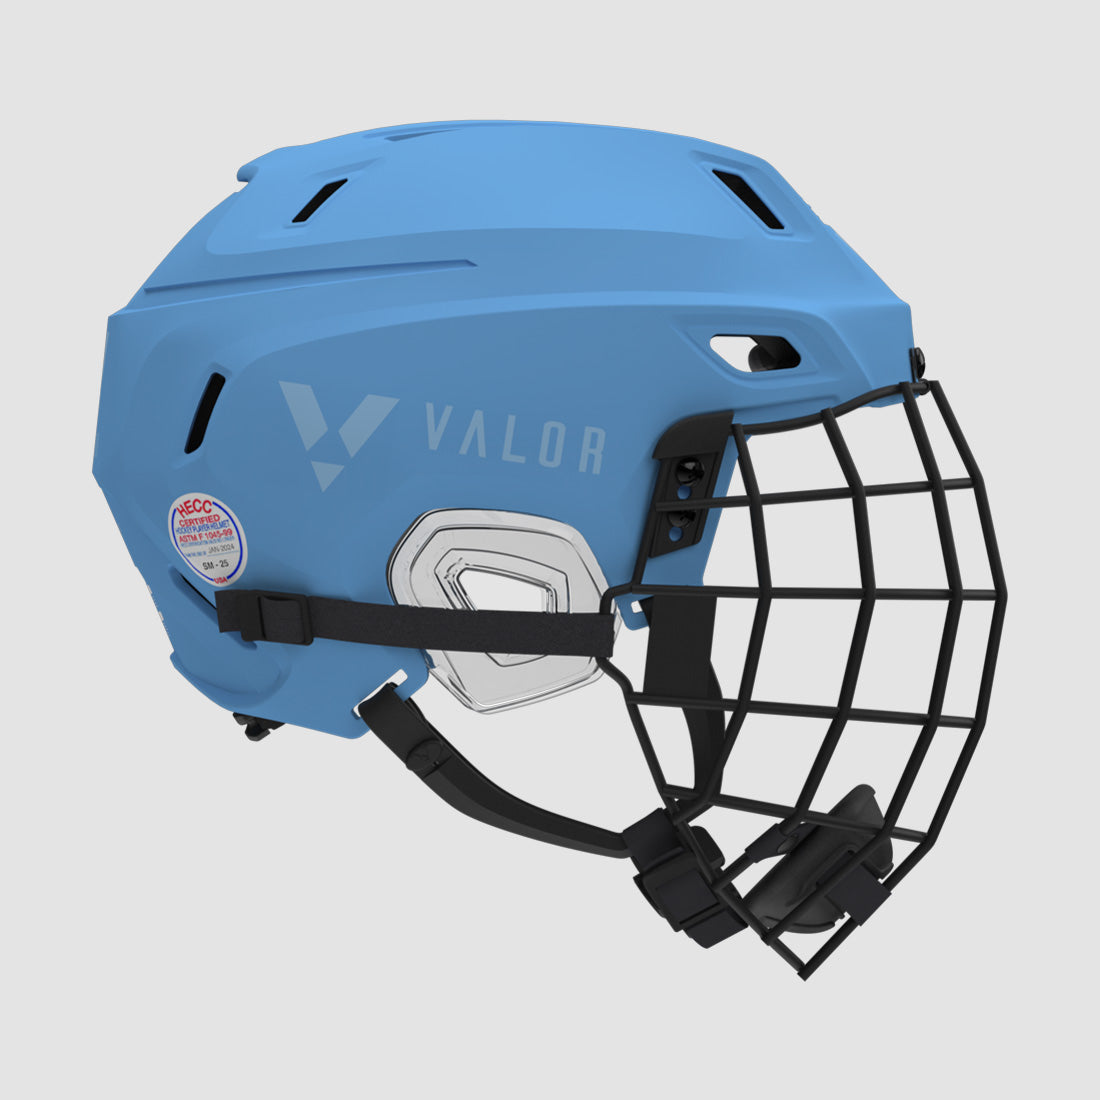 valor-blue-with-cage